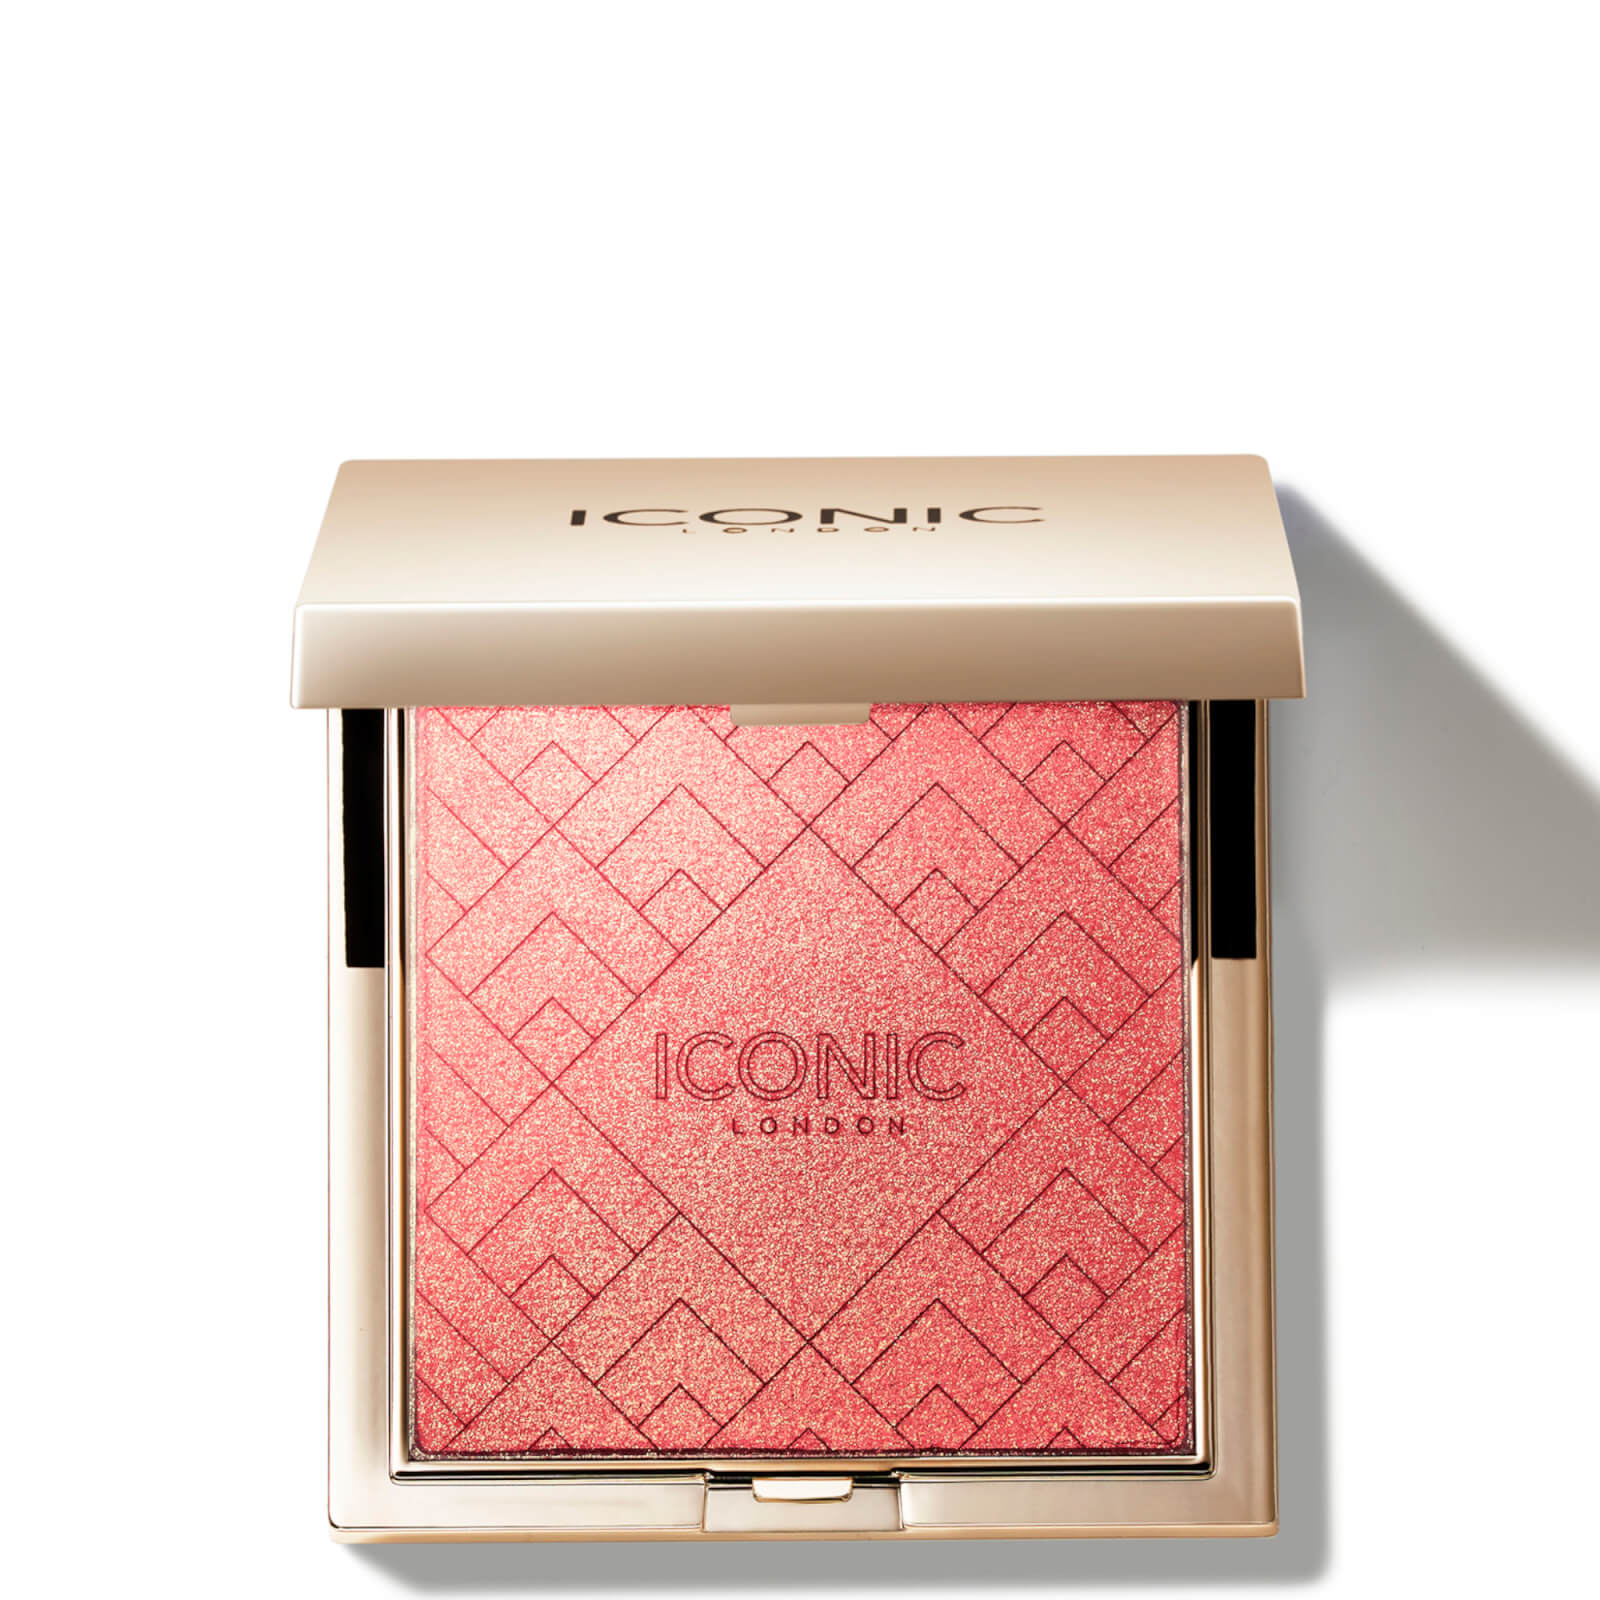 ICONIC London Kissed by the Sun Multi-Use Cheek Glow Exclusive (Various Shades) - Hot Stuff